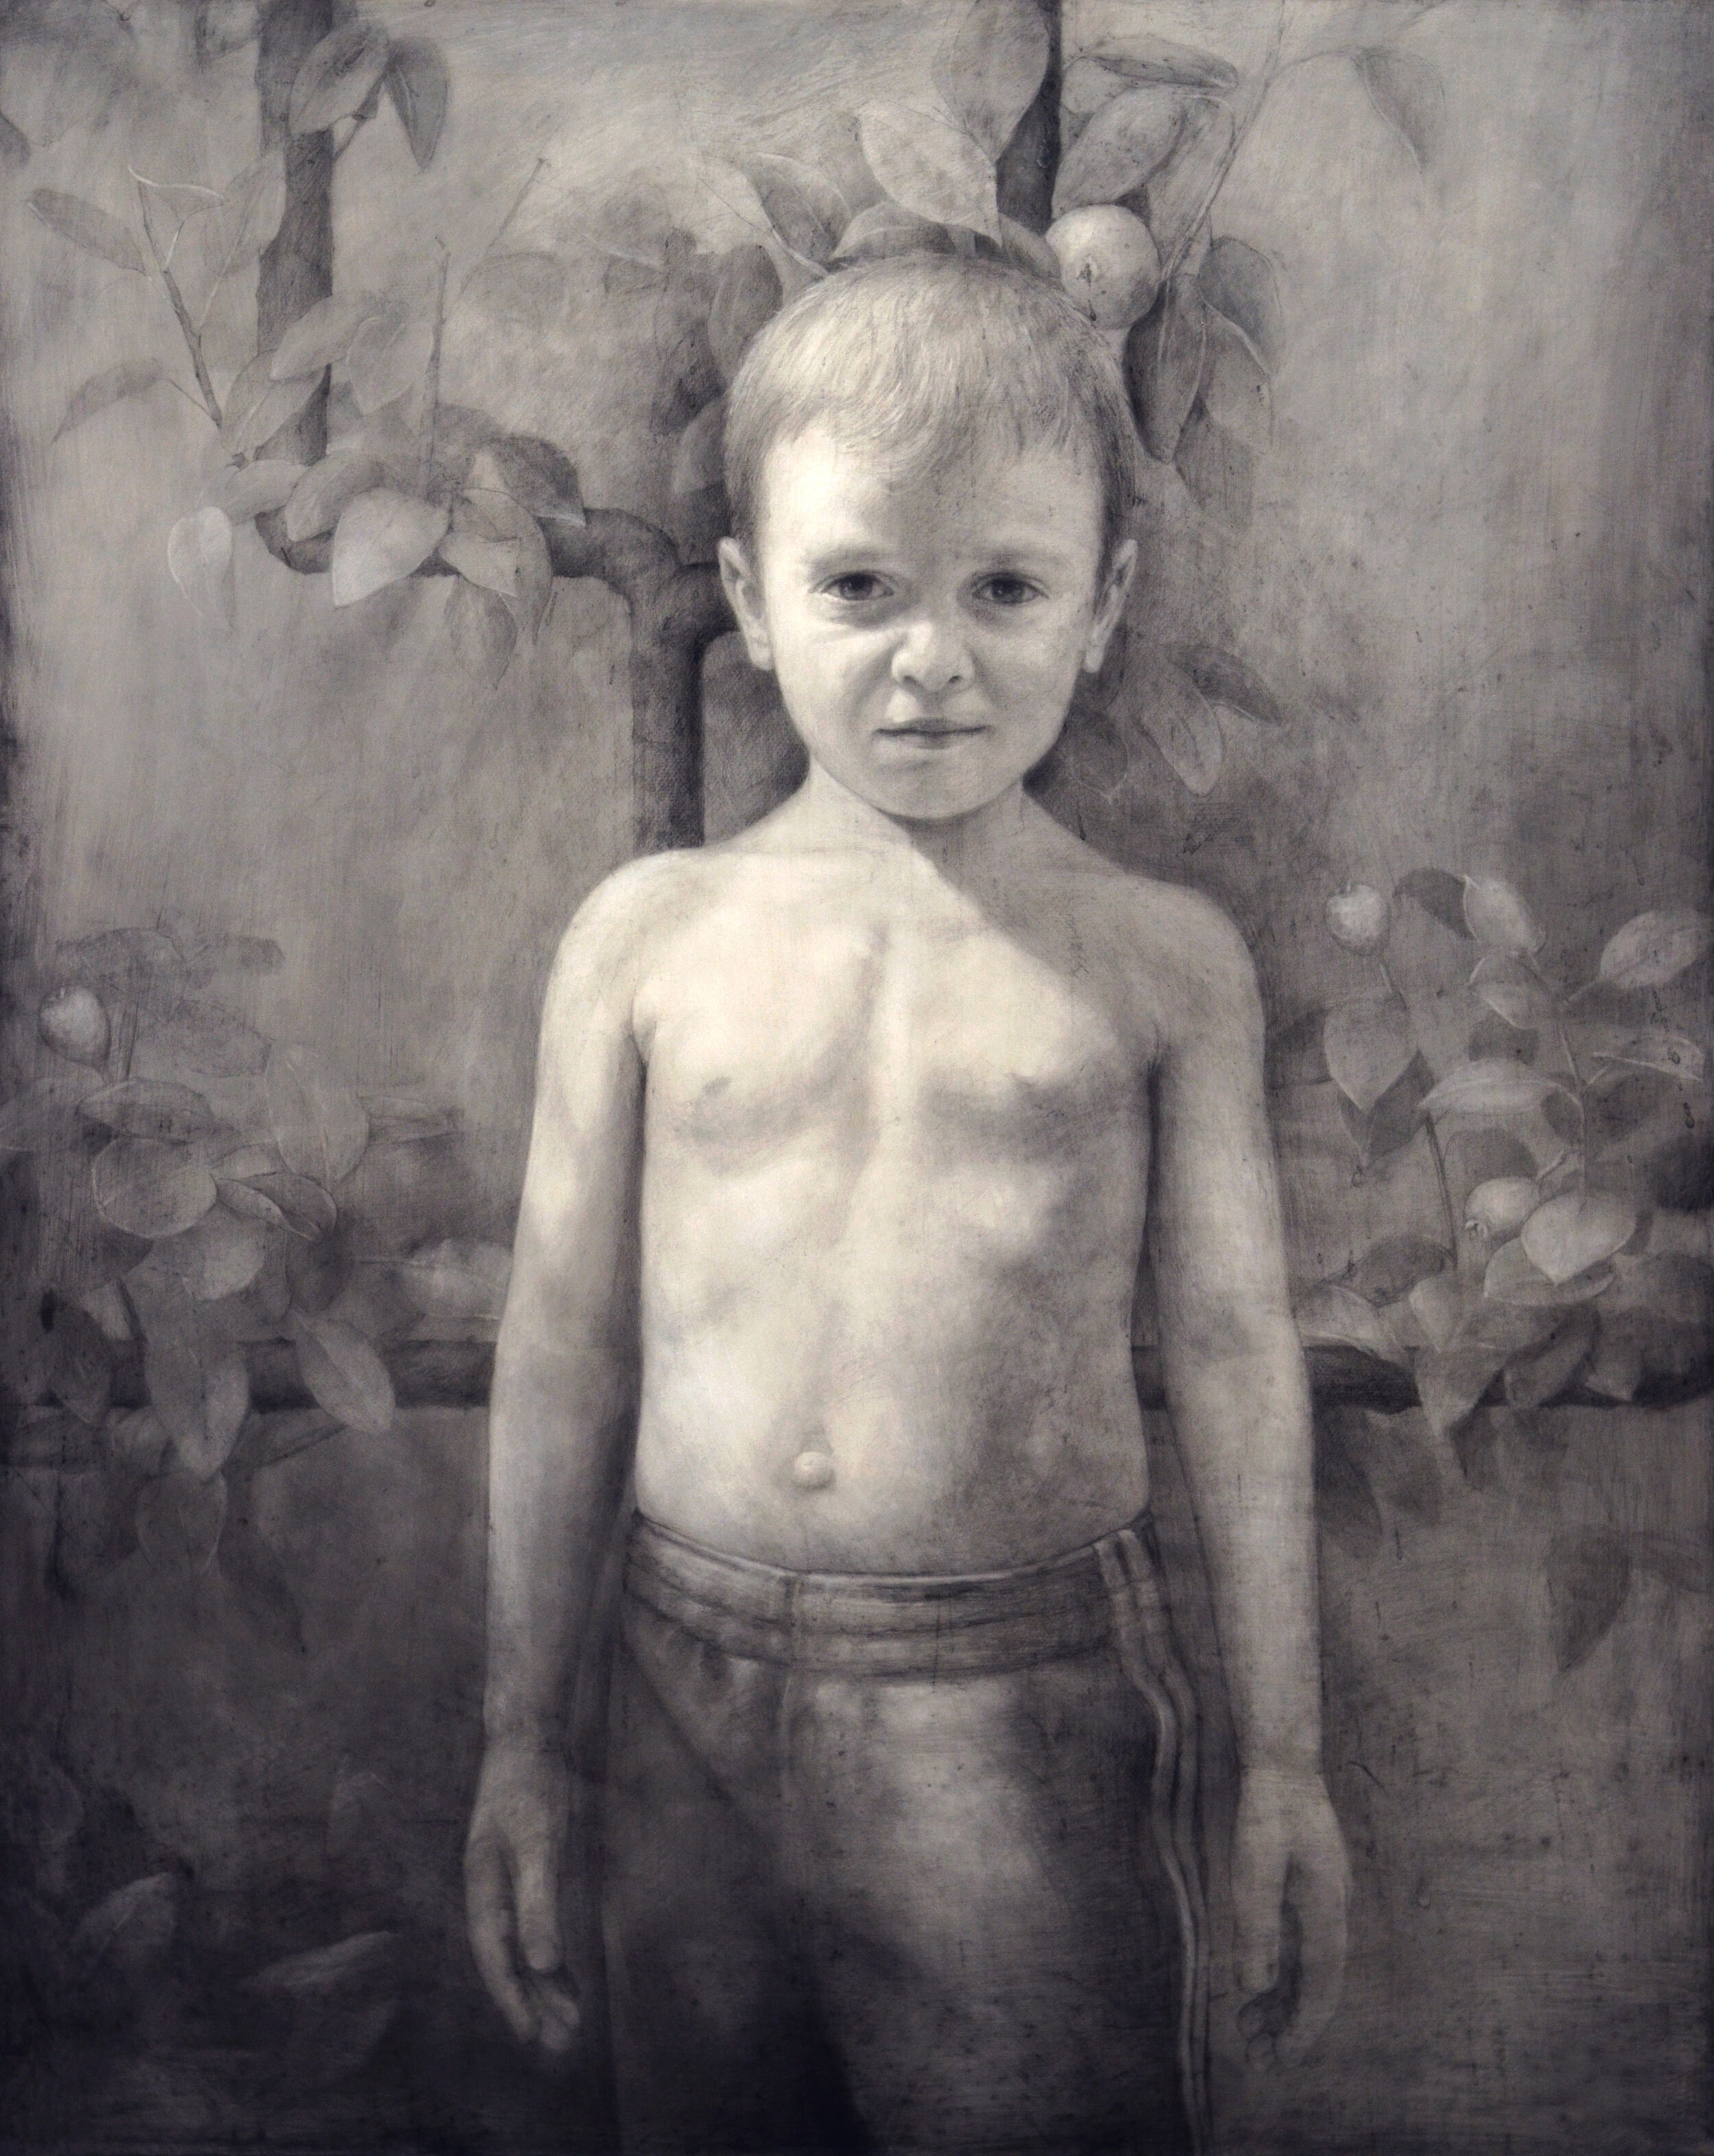   Ravi and Espalier , graphite on canvas mounted to board, 20” x 16”, 2020  This piece is part of a body of recent work currently on view at Winfield Gallery in Carmel-by-the-Sea, CA. https://winfieldgallery.com/   